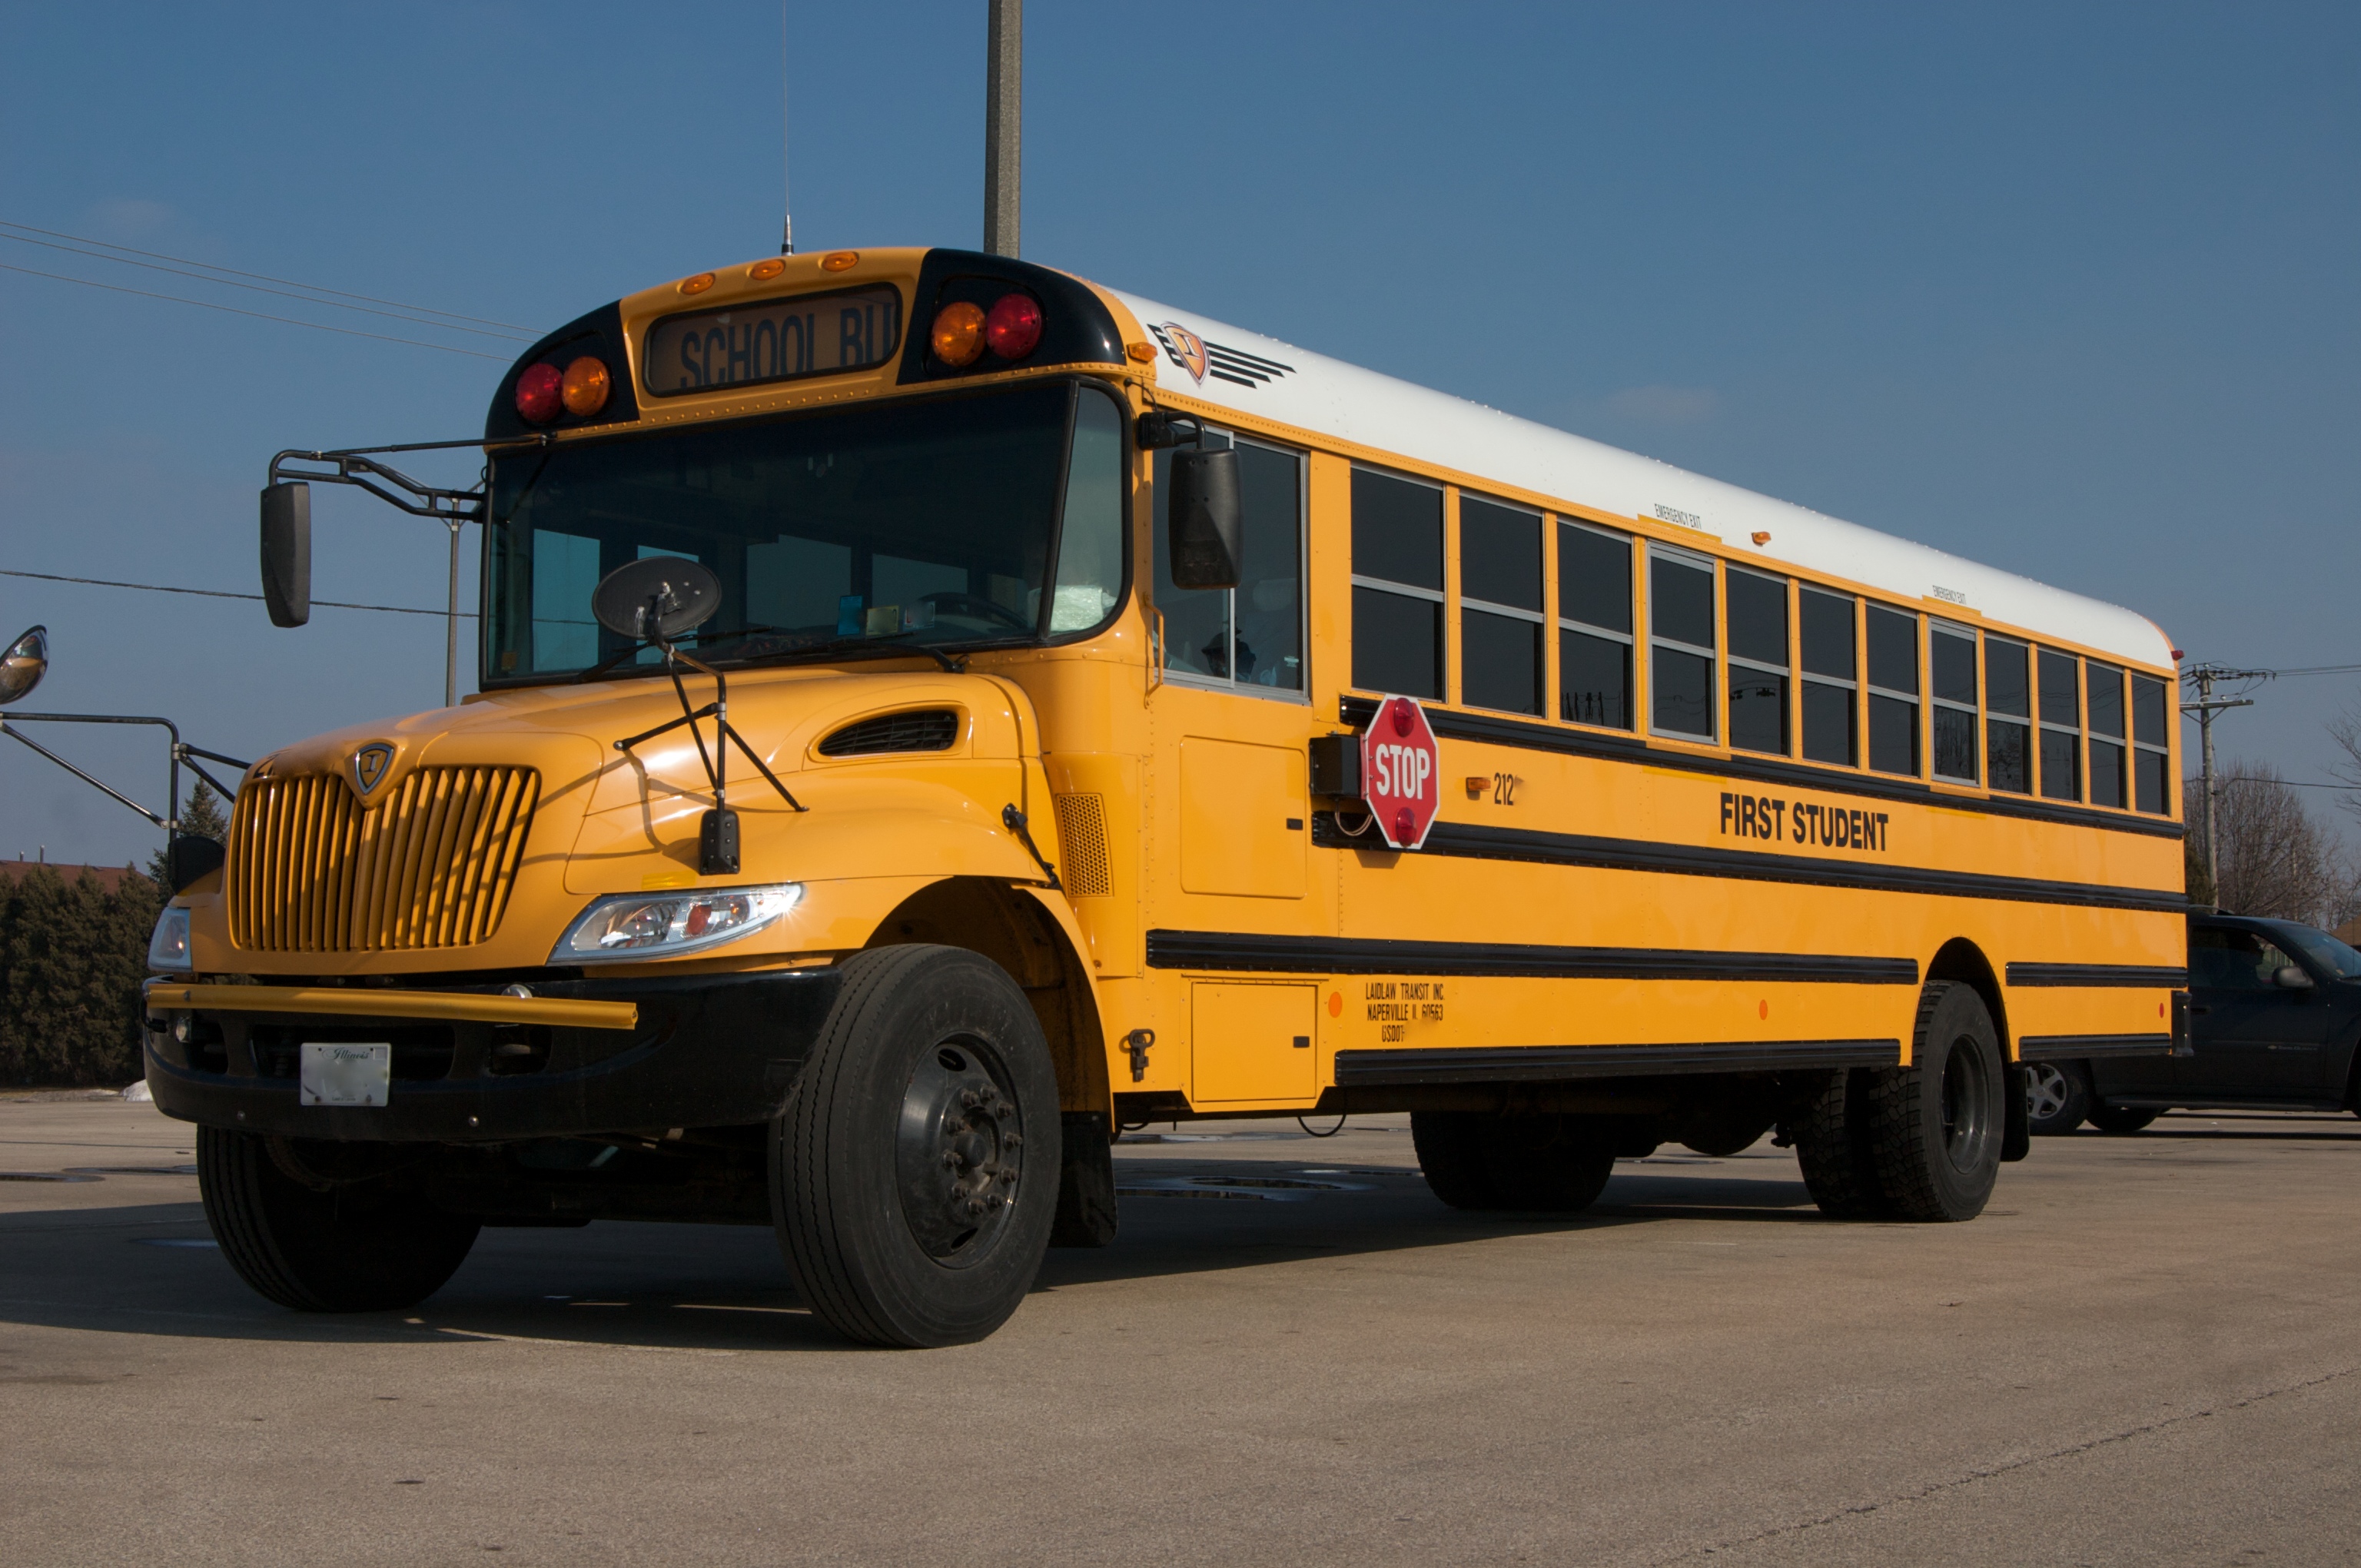 Using school buses to provide Internet to poorer communities